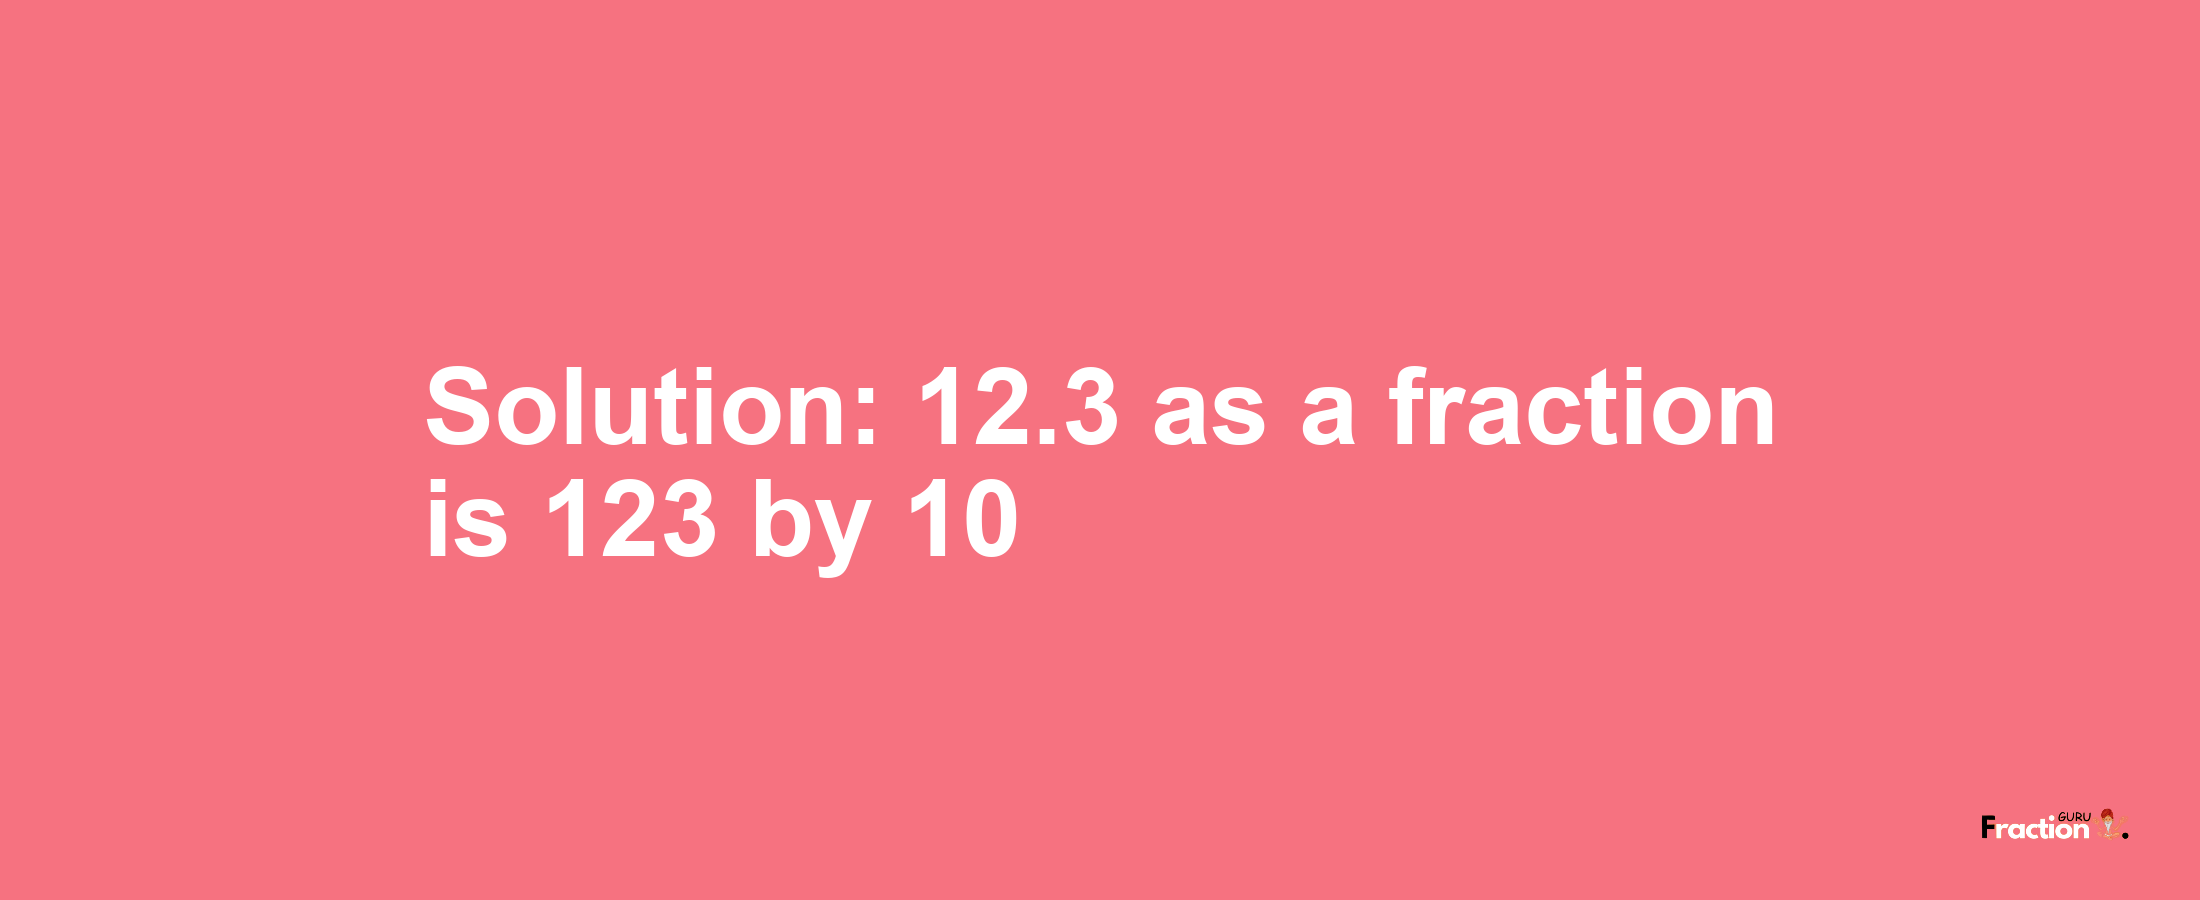 Solution:12.3 as a fraction is 123/10